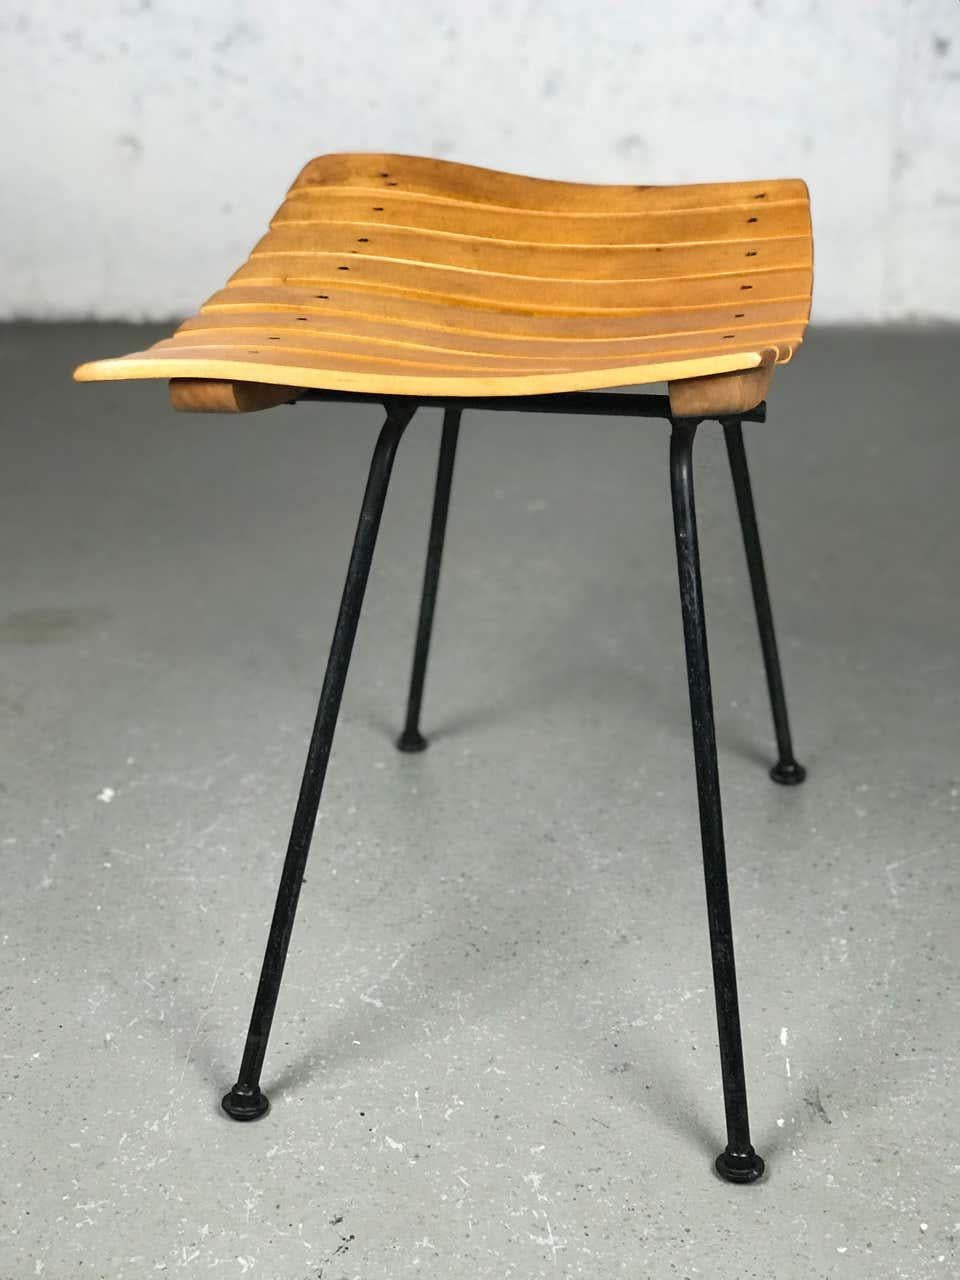 American Mid Century Modern Stool or Chair by Arthur Umanoff for Shaver Howard